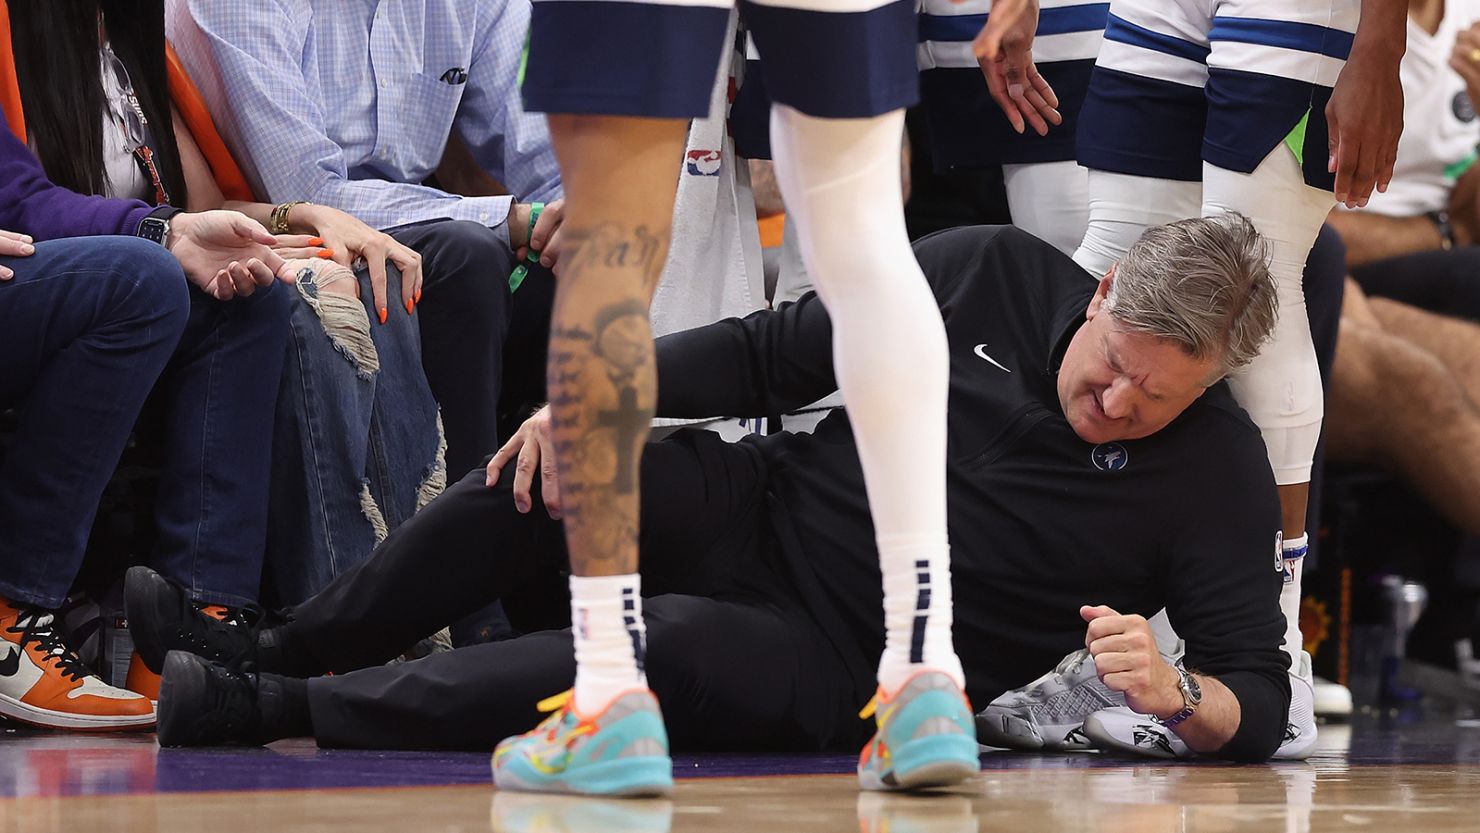 Minnesota Timberwolves head coach Chris Finch grabs his leg after a collision with a player during a game against the Phoenix Suns.